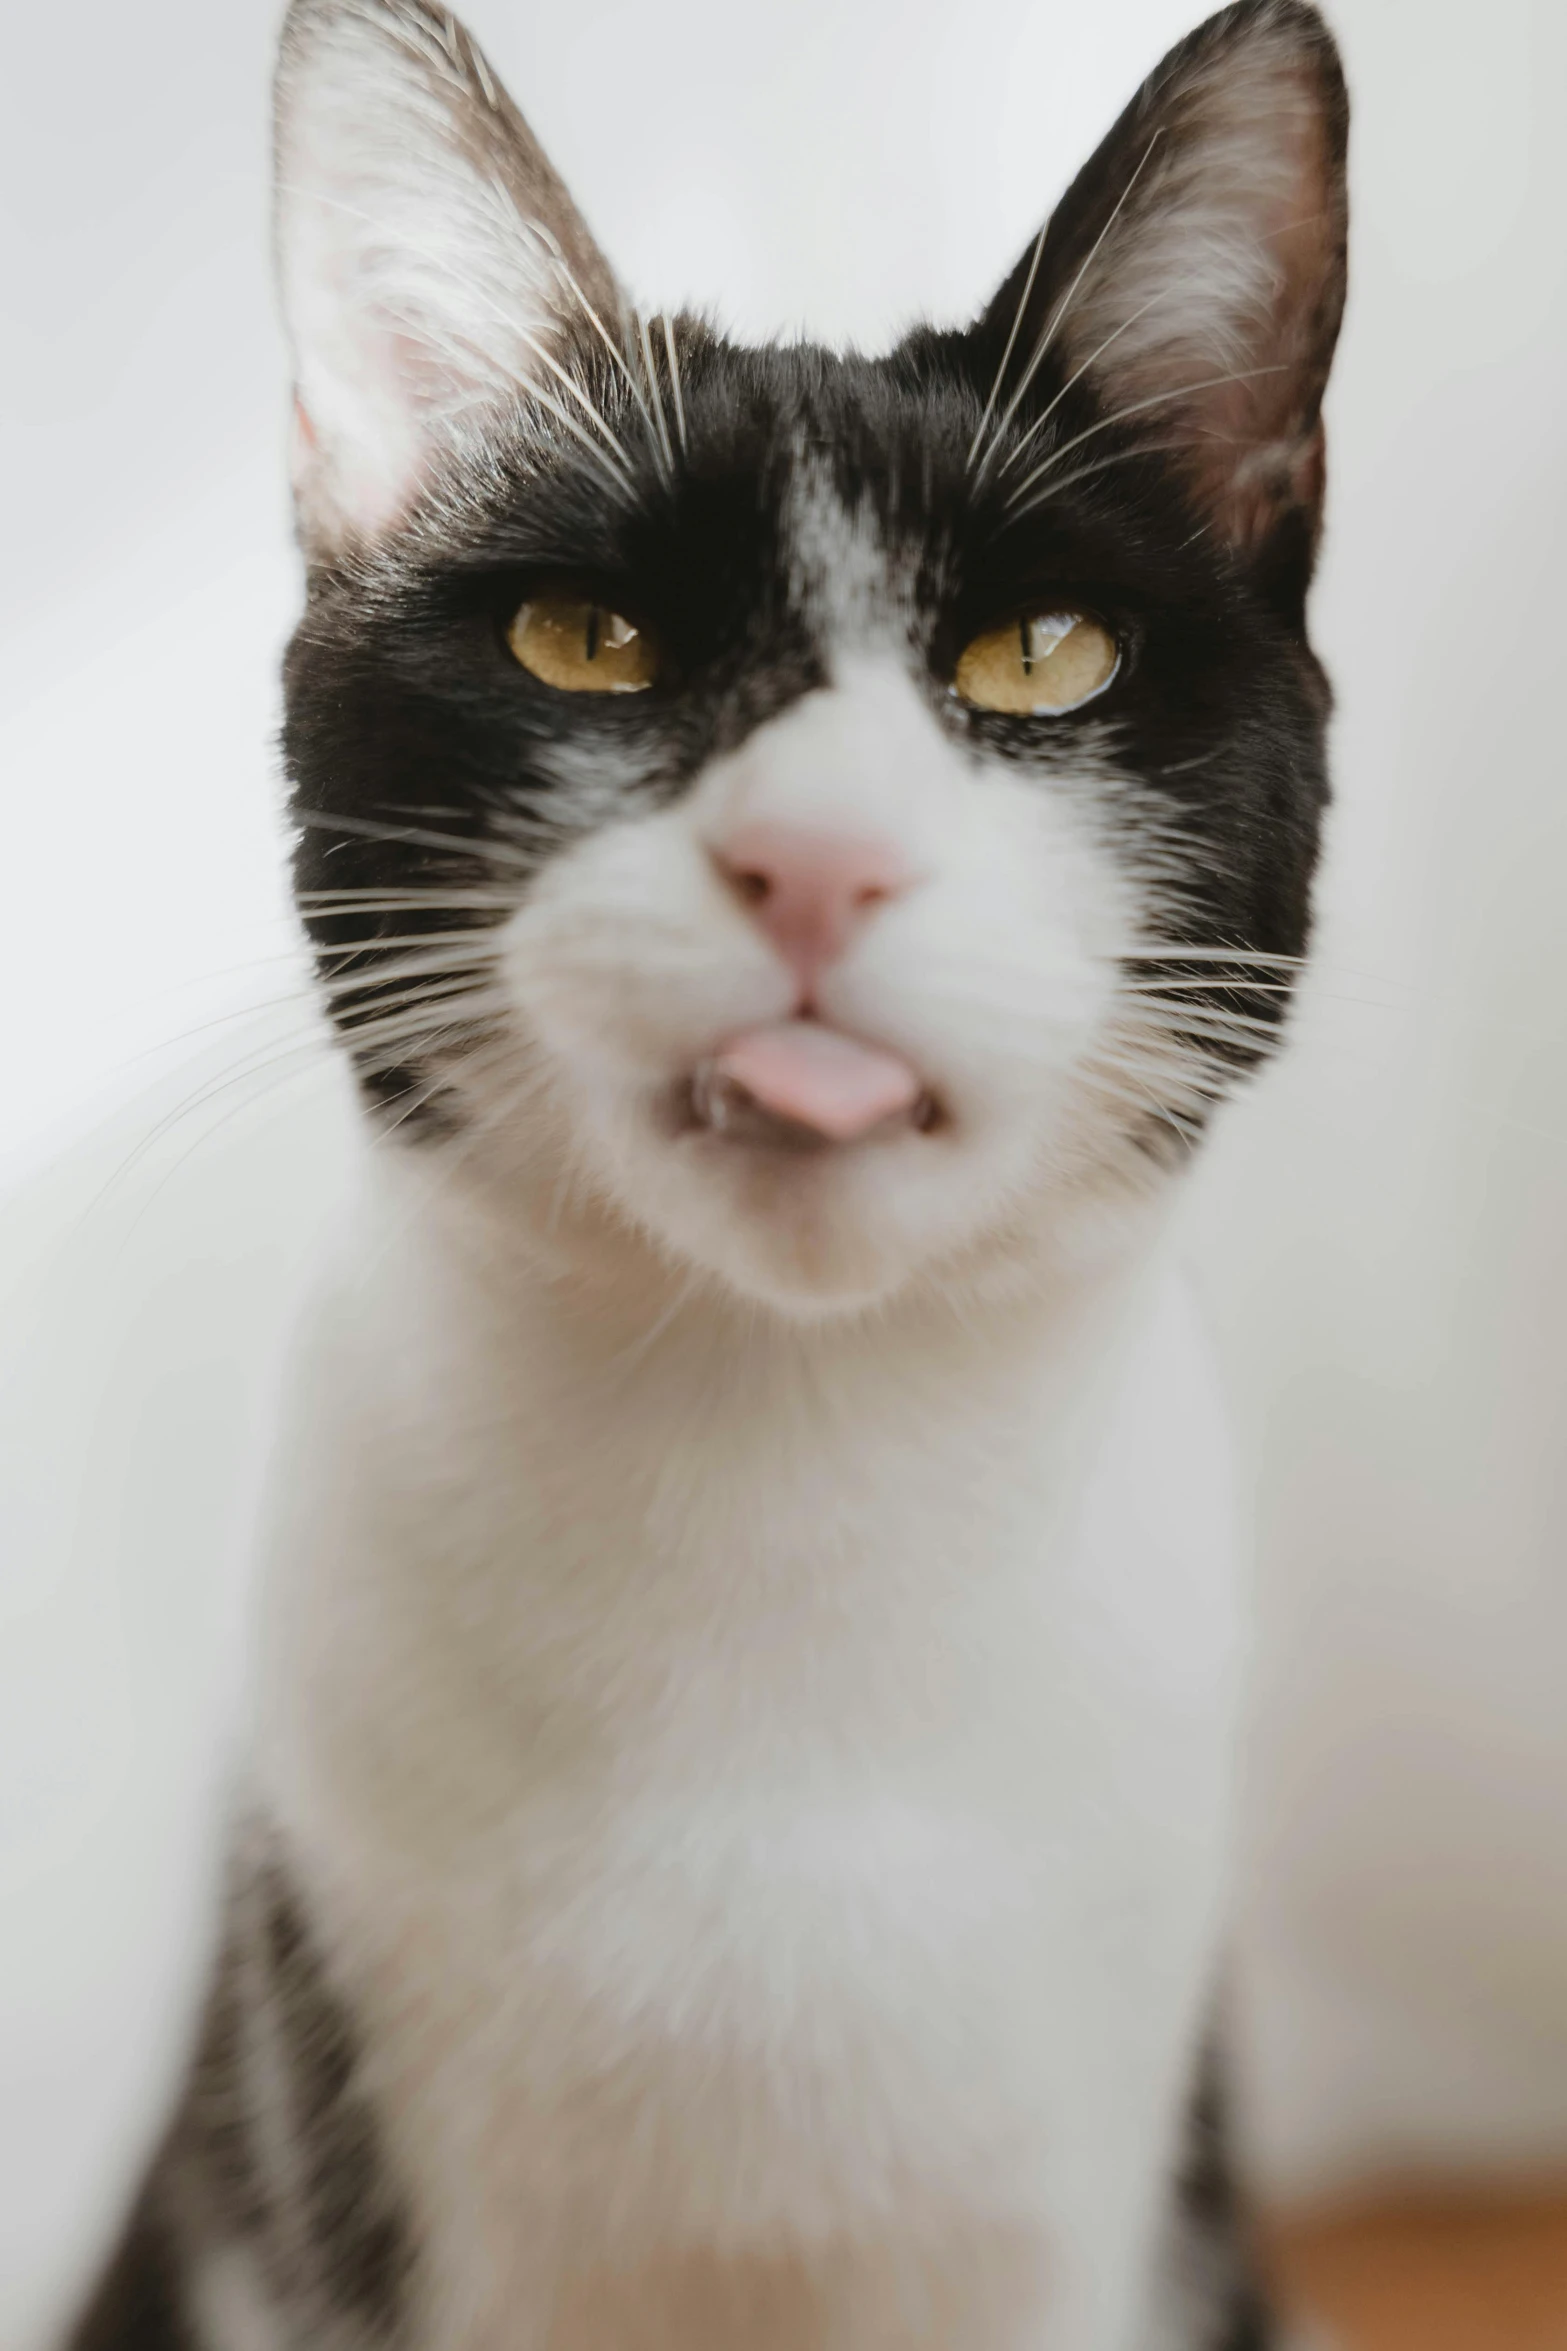 an up close s of a black and white cat with its tongue out